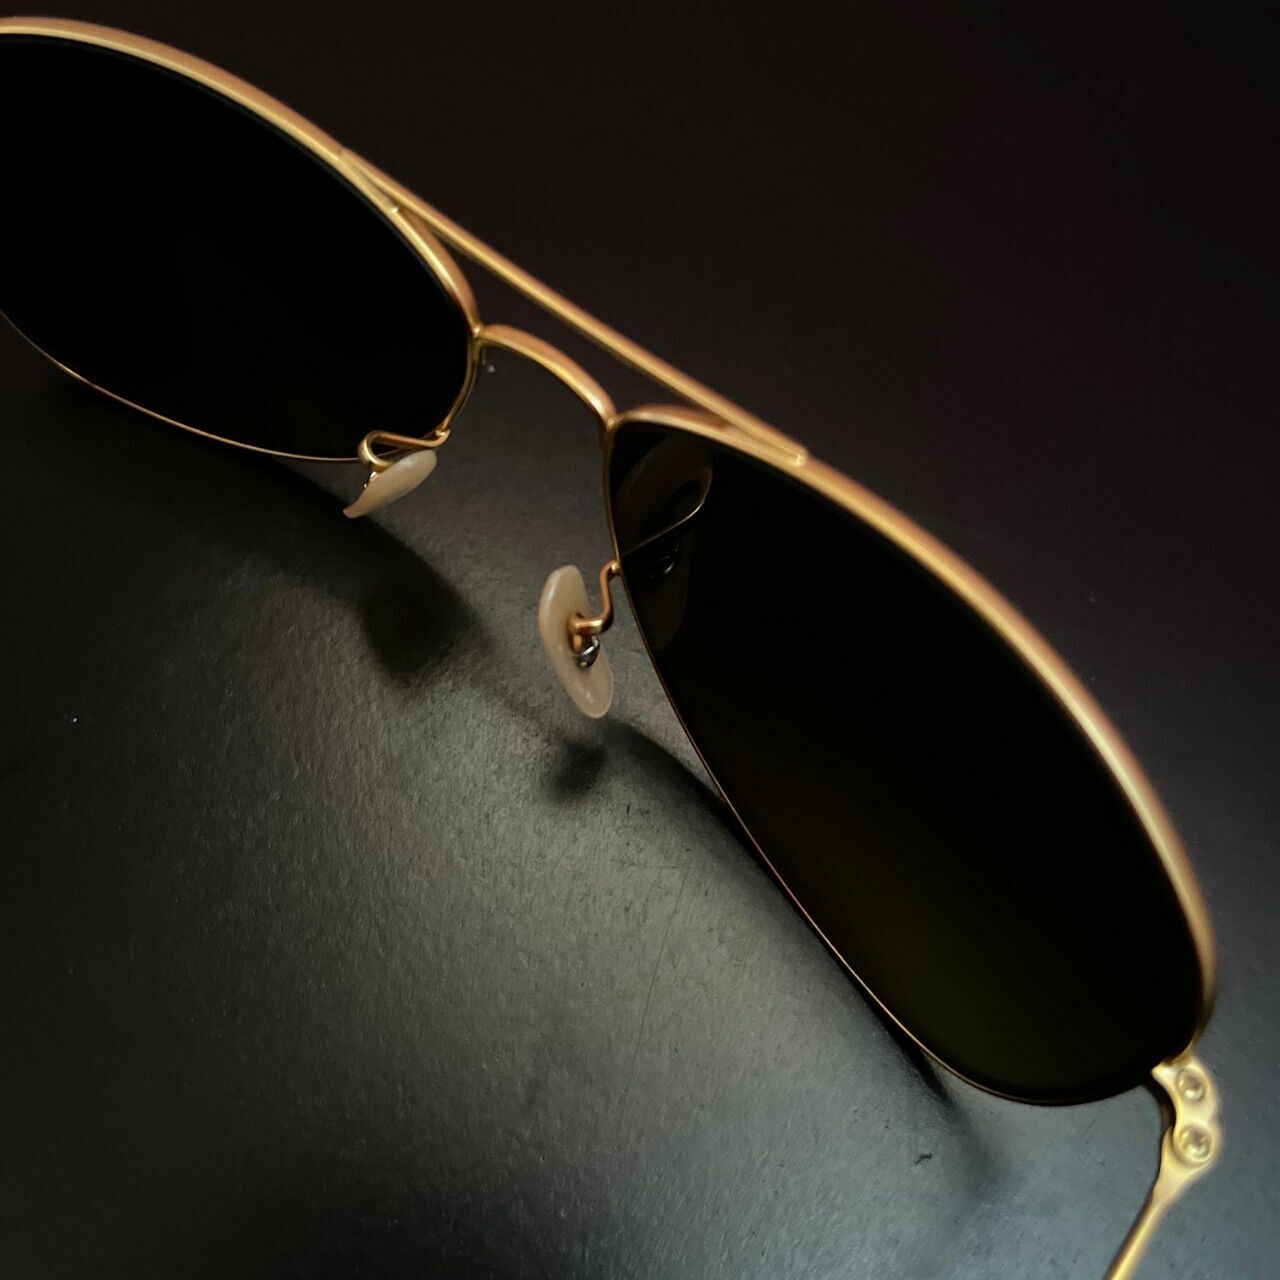 Ray Ban Aviator Flash Lenses Sunglasses In Gold And Blue 